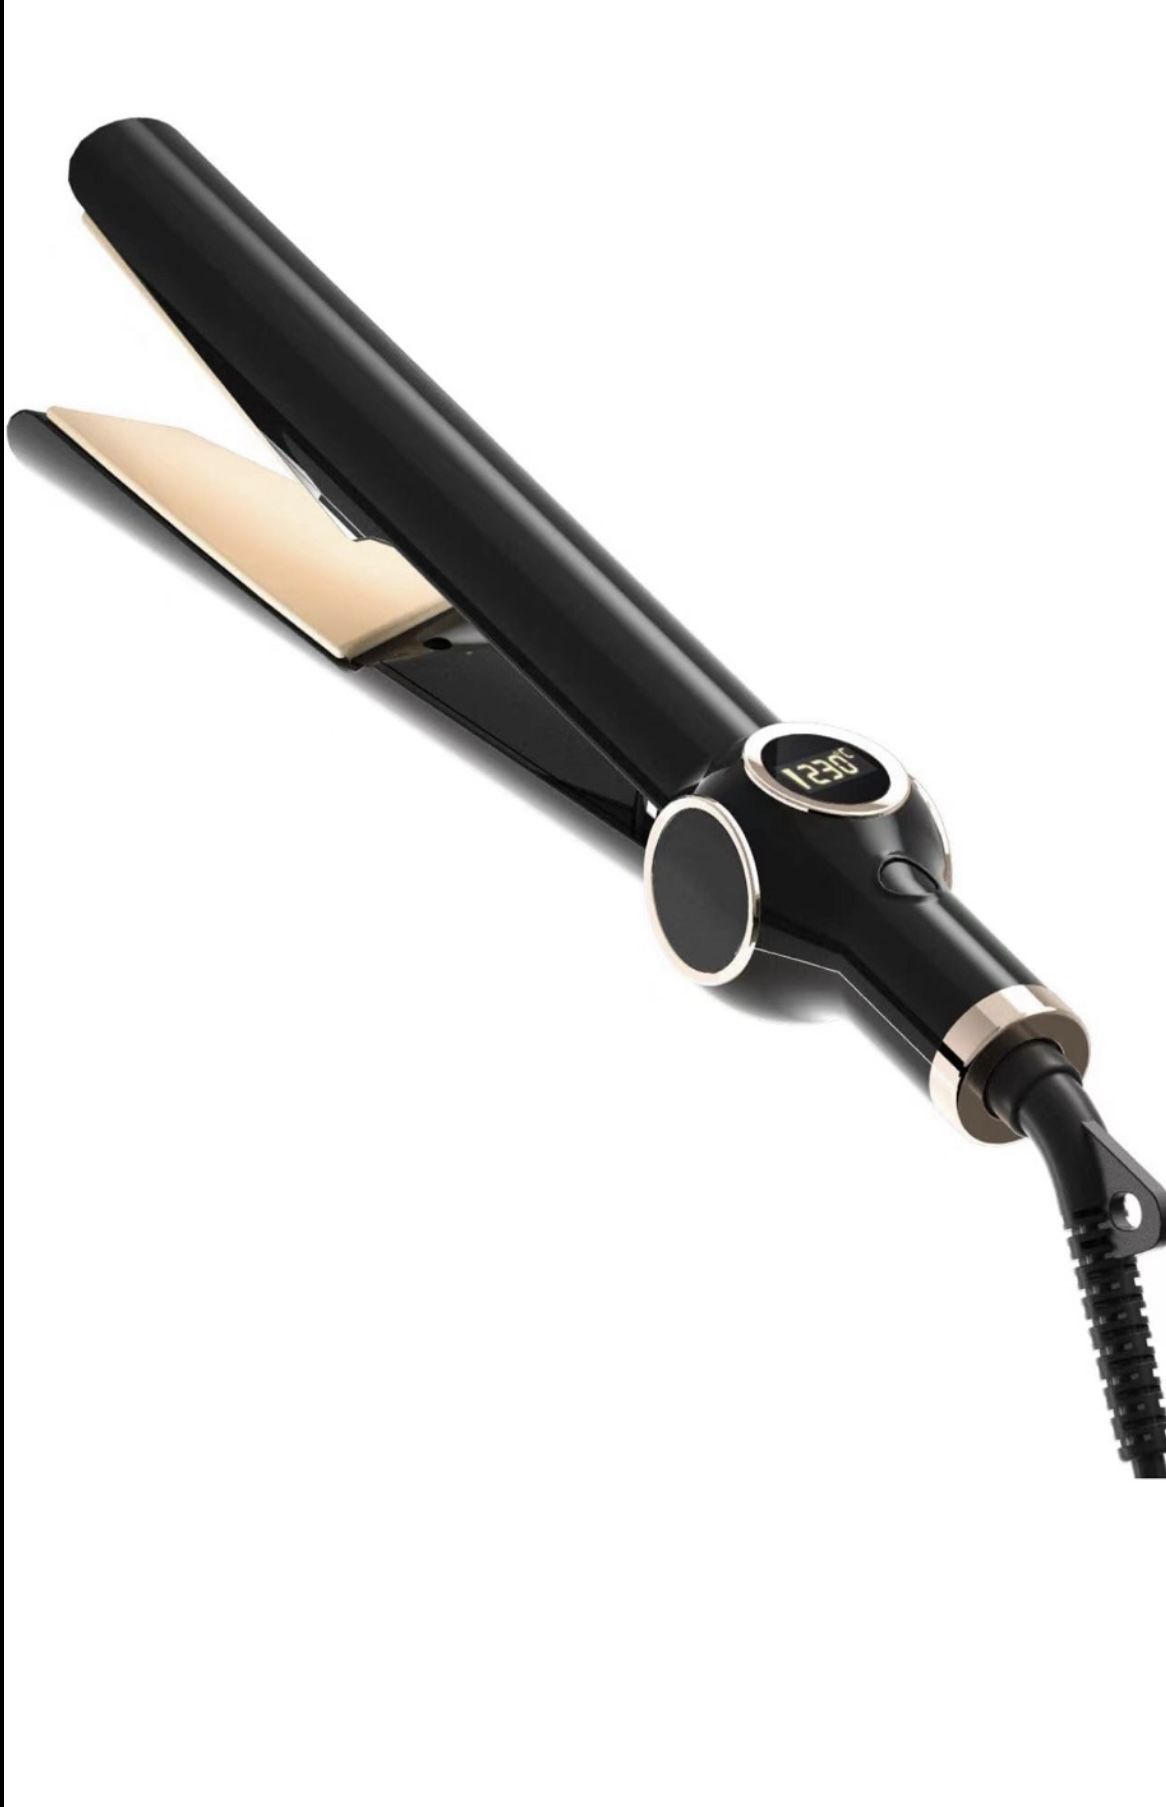 hair straightener and curler 2 in 1